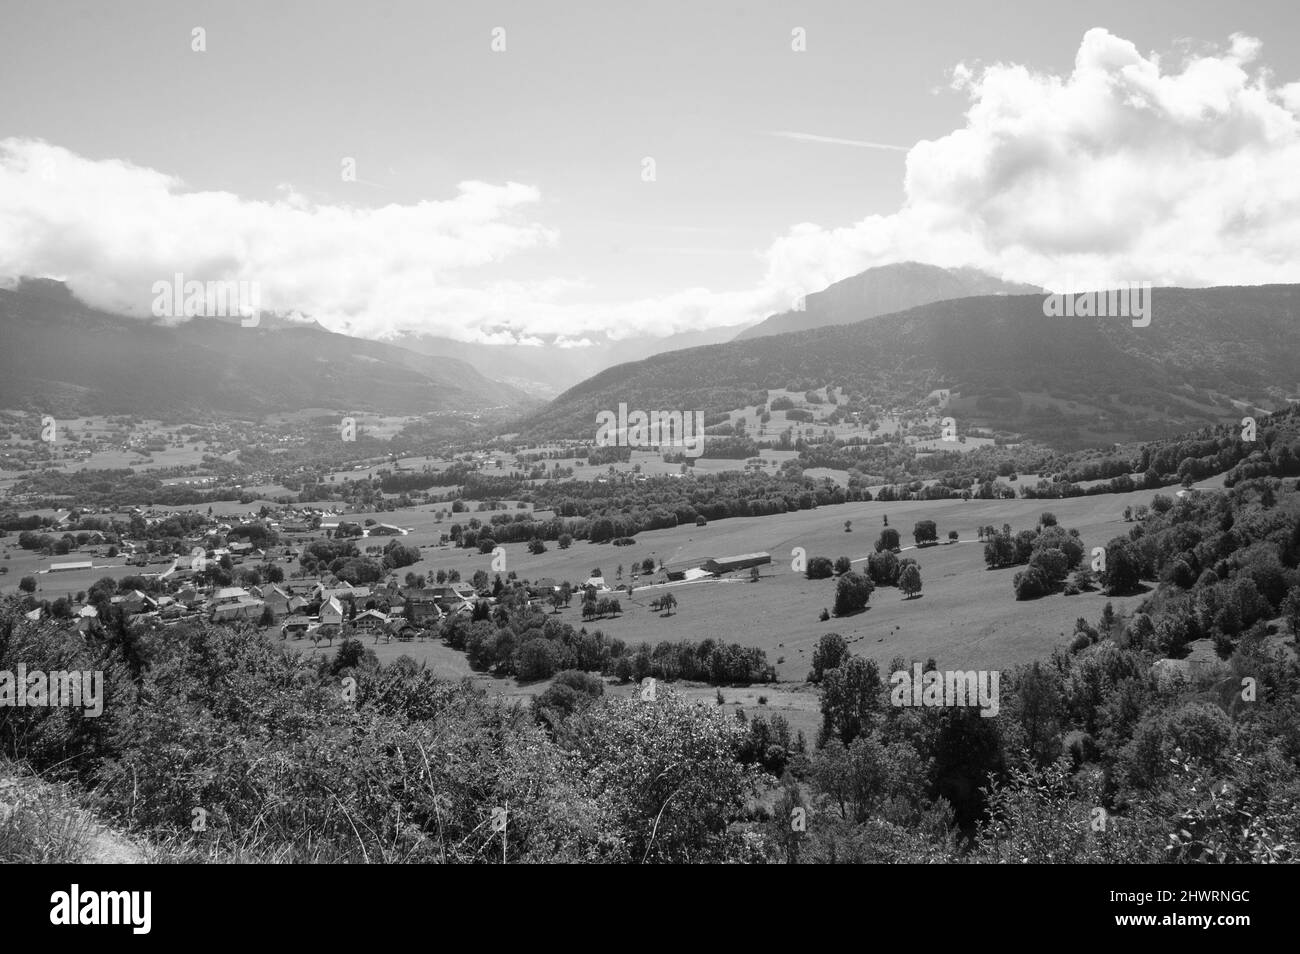 Alpine valley. Clouds over mountains. Annecy lake area (Haute-Savoie, France). Aerial view from above. Black and white photo. Stock Photo